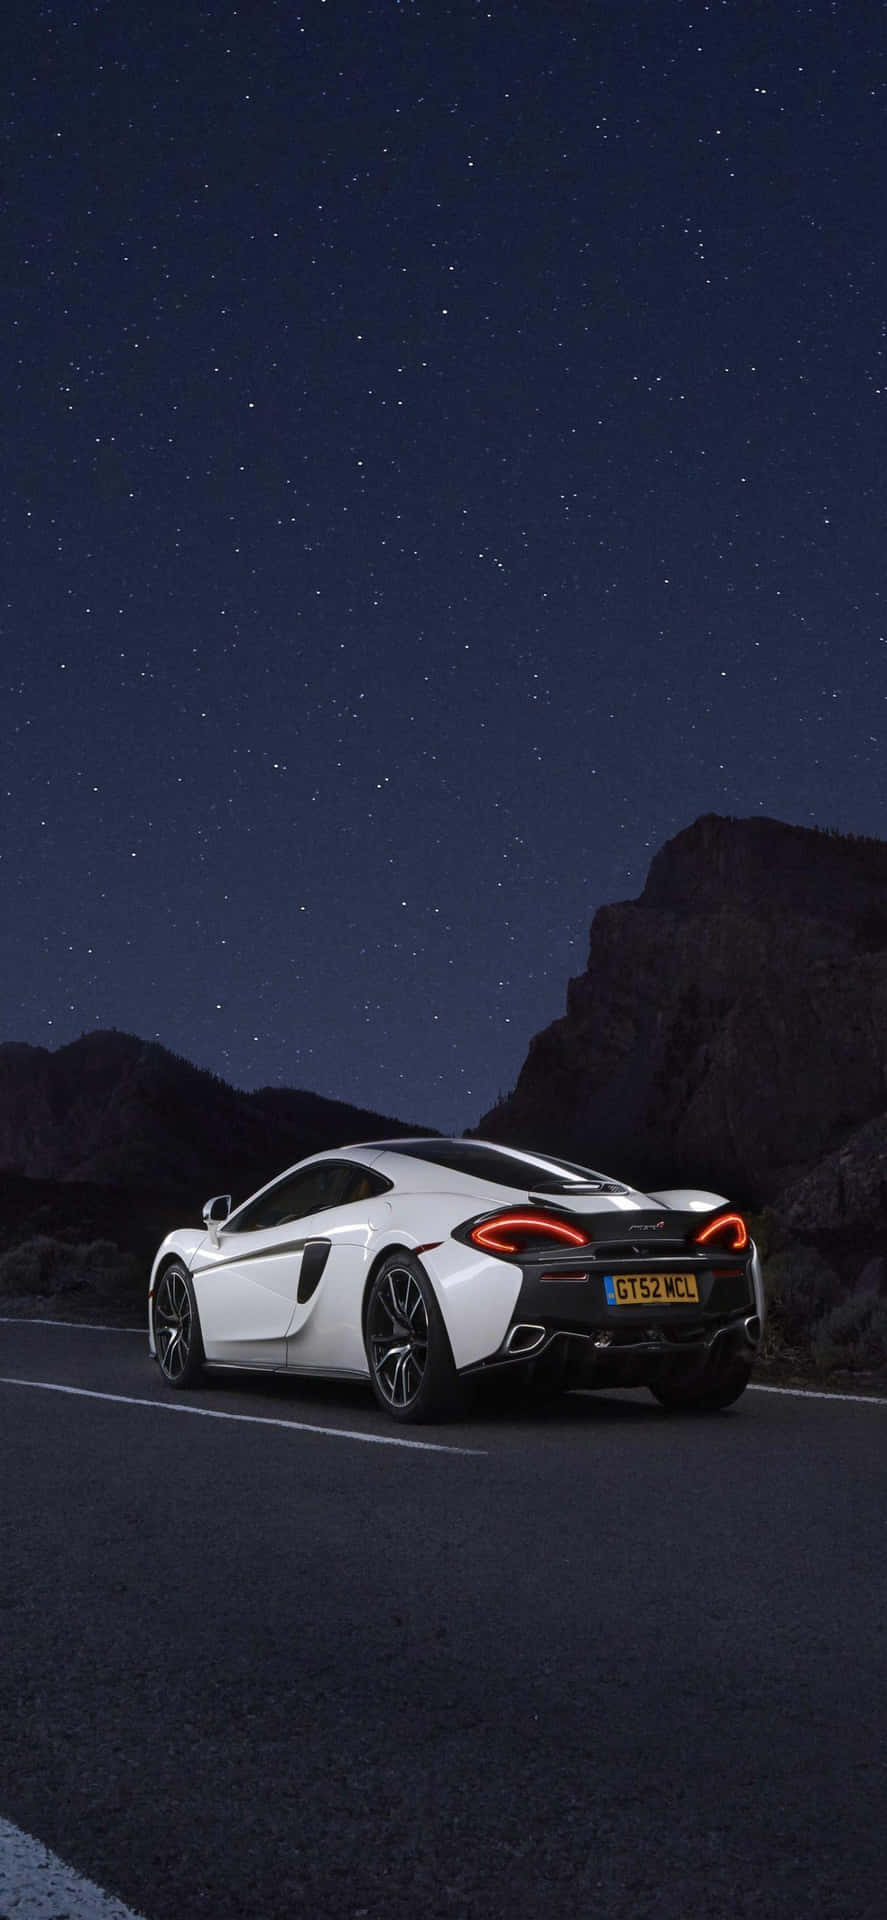 The Iphone Xs and the Mclaren 720s are the perfect combination of power and elegance.